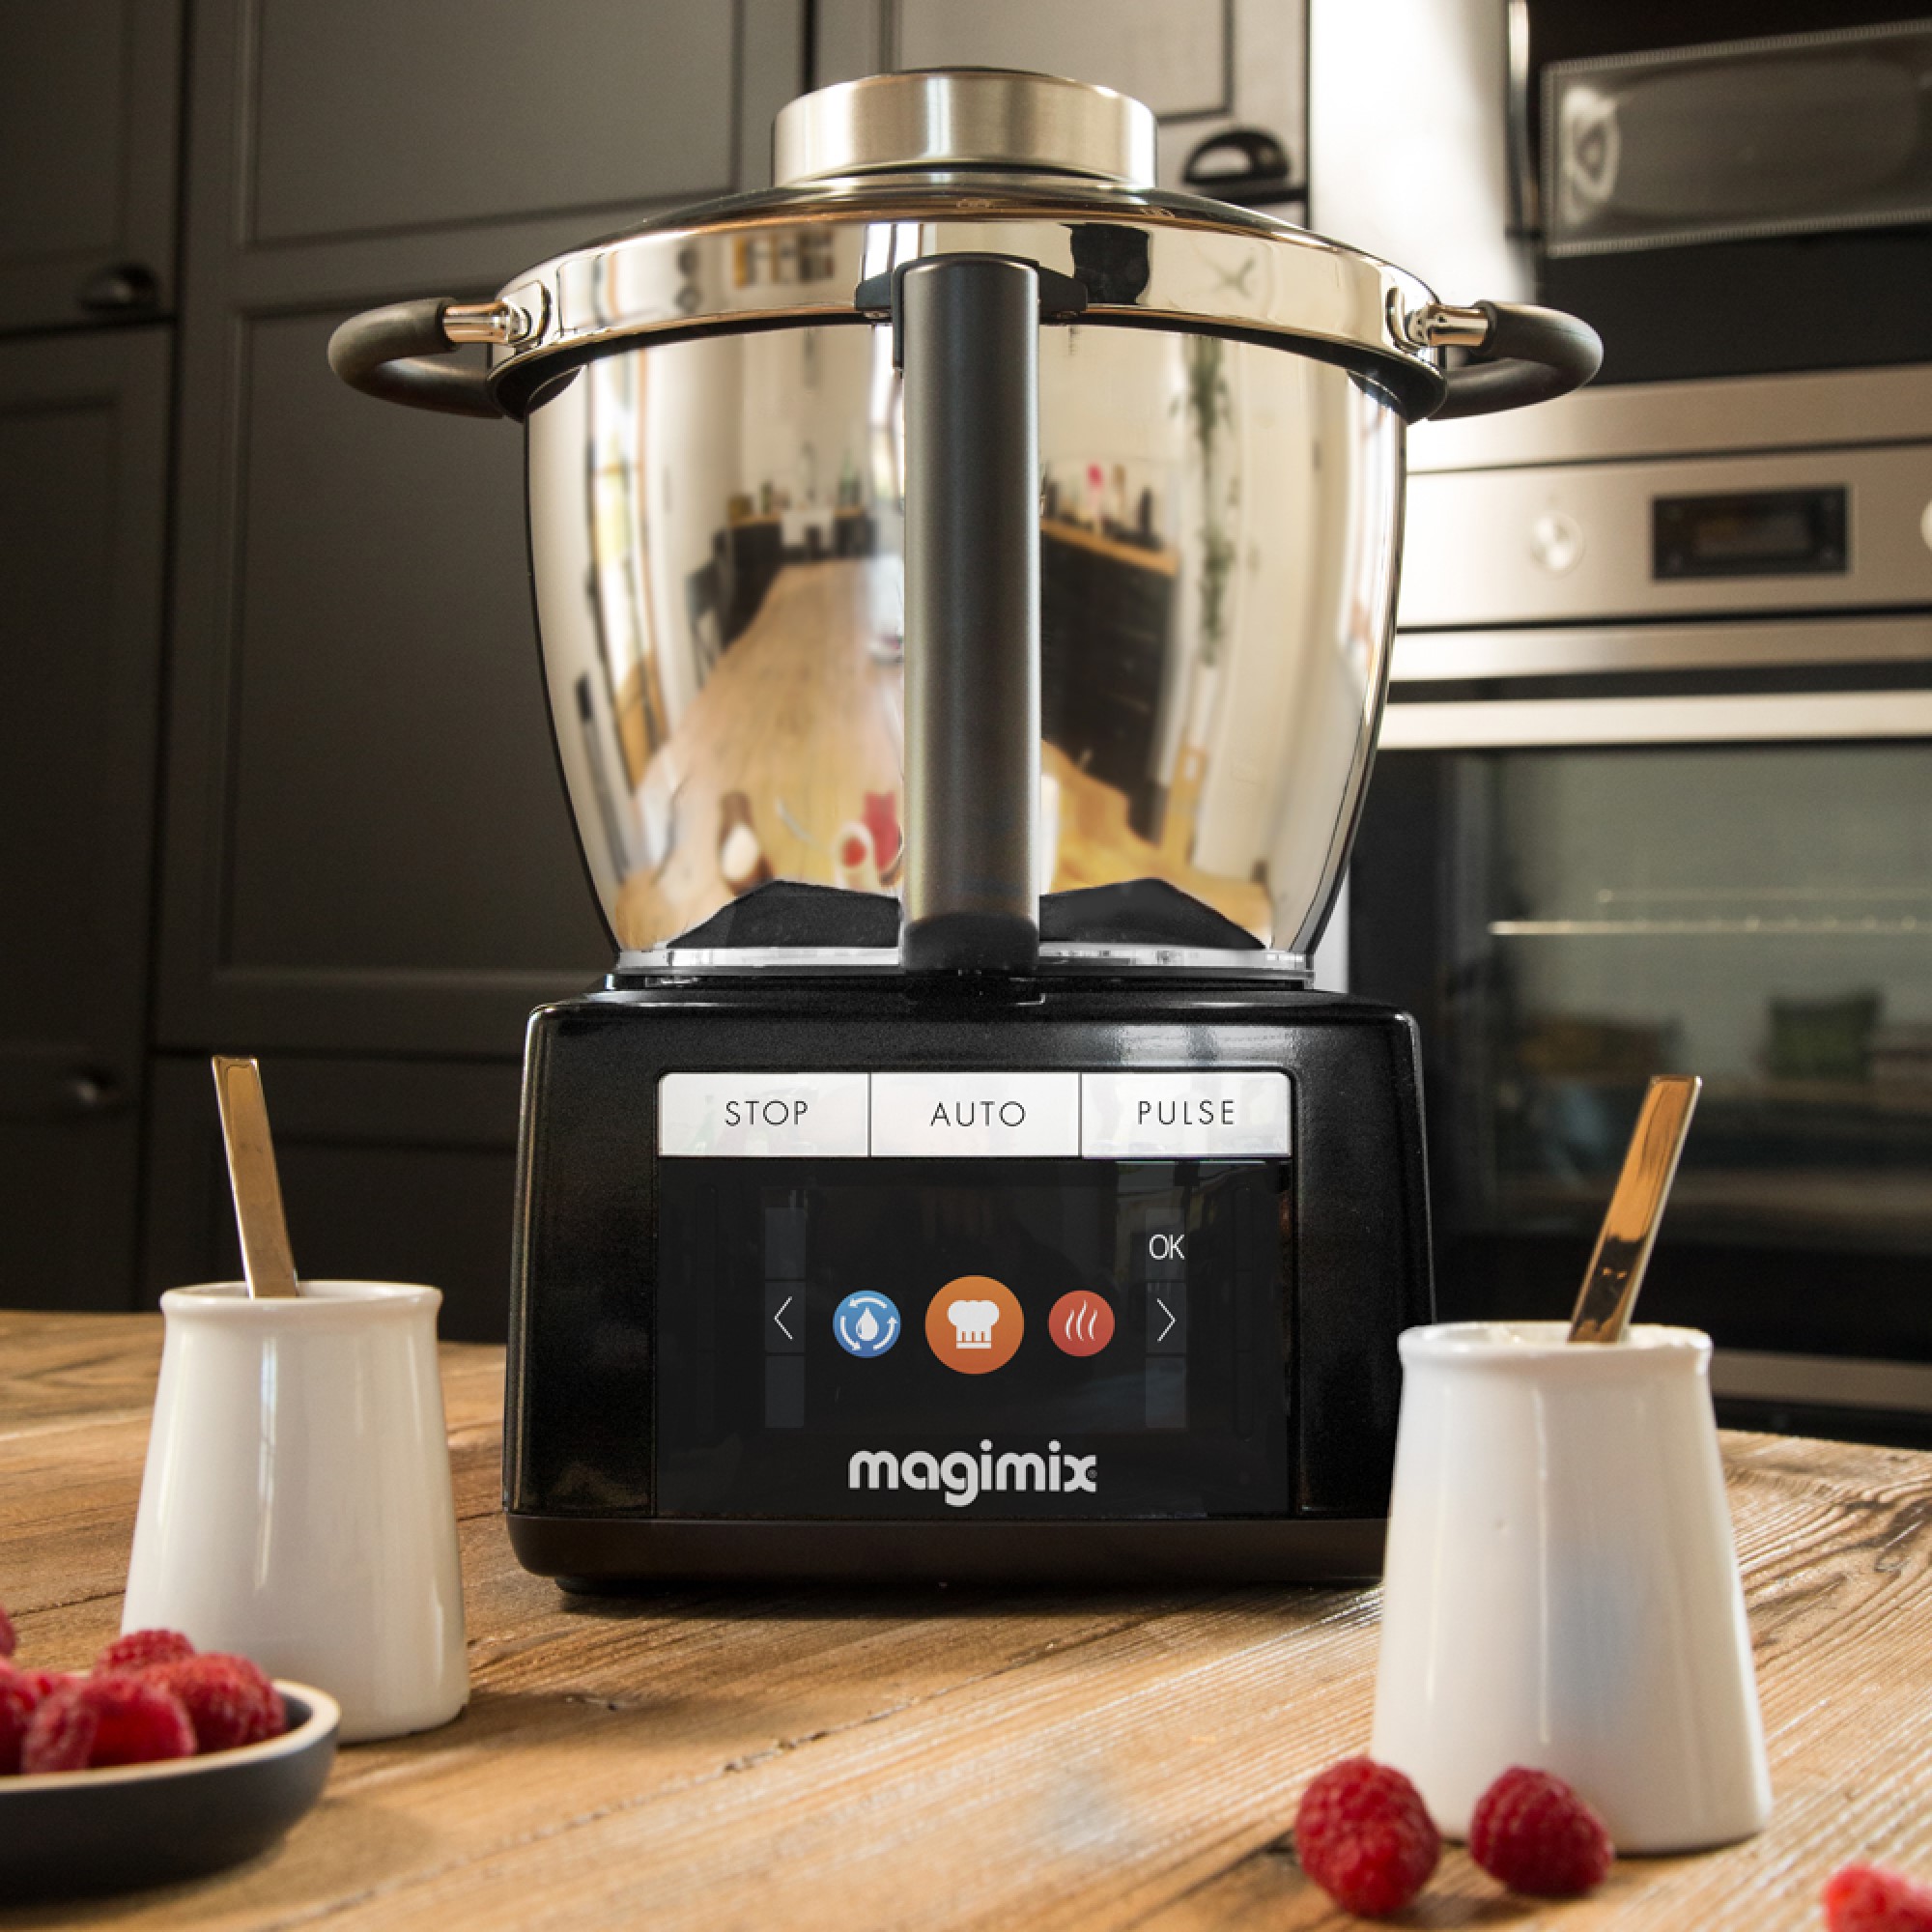 REVIEW: Is the popular Magimix Le Patissier really such a good